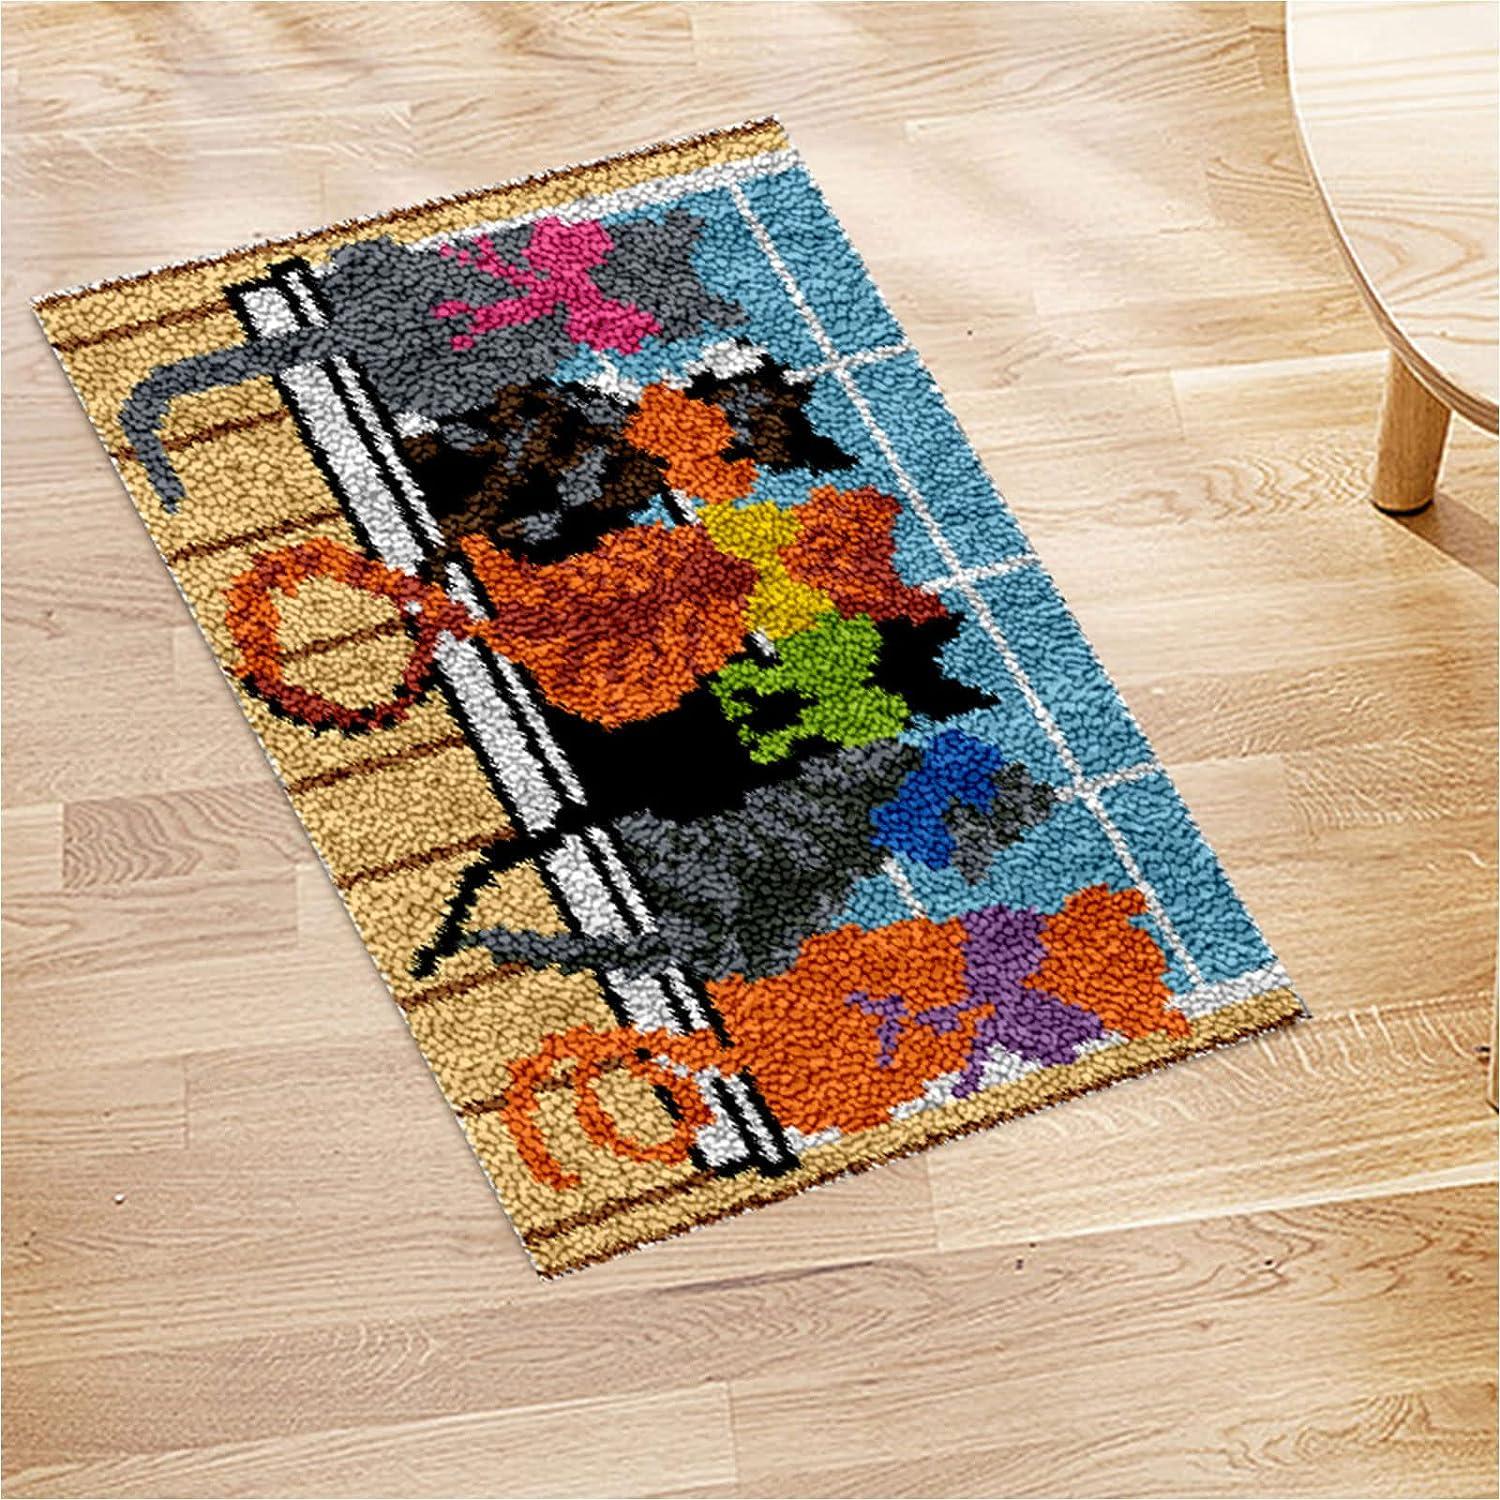 EVAJE Latch Hook Rug Kit for Adults DIY Crochet Yarn Kits with Color  Printed Canvas Black Cat Pattern Rug Making Craft Embroidery Tapestry Set  Home Decor Festival Gift 20.5''X14